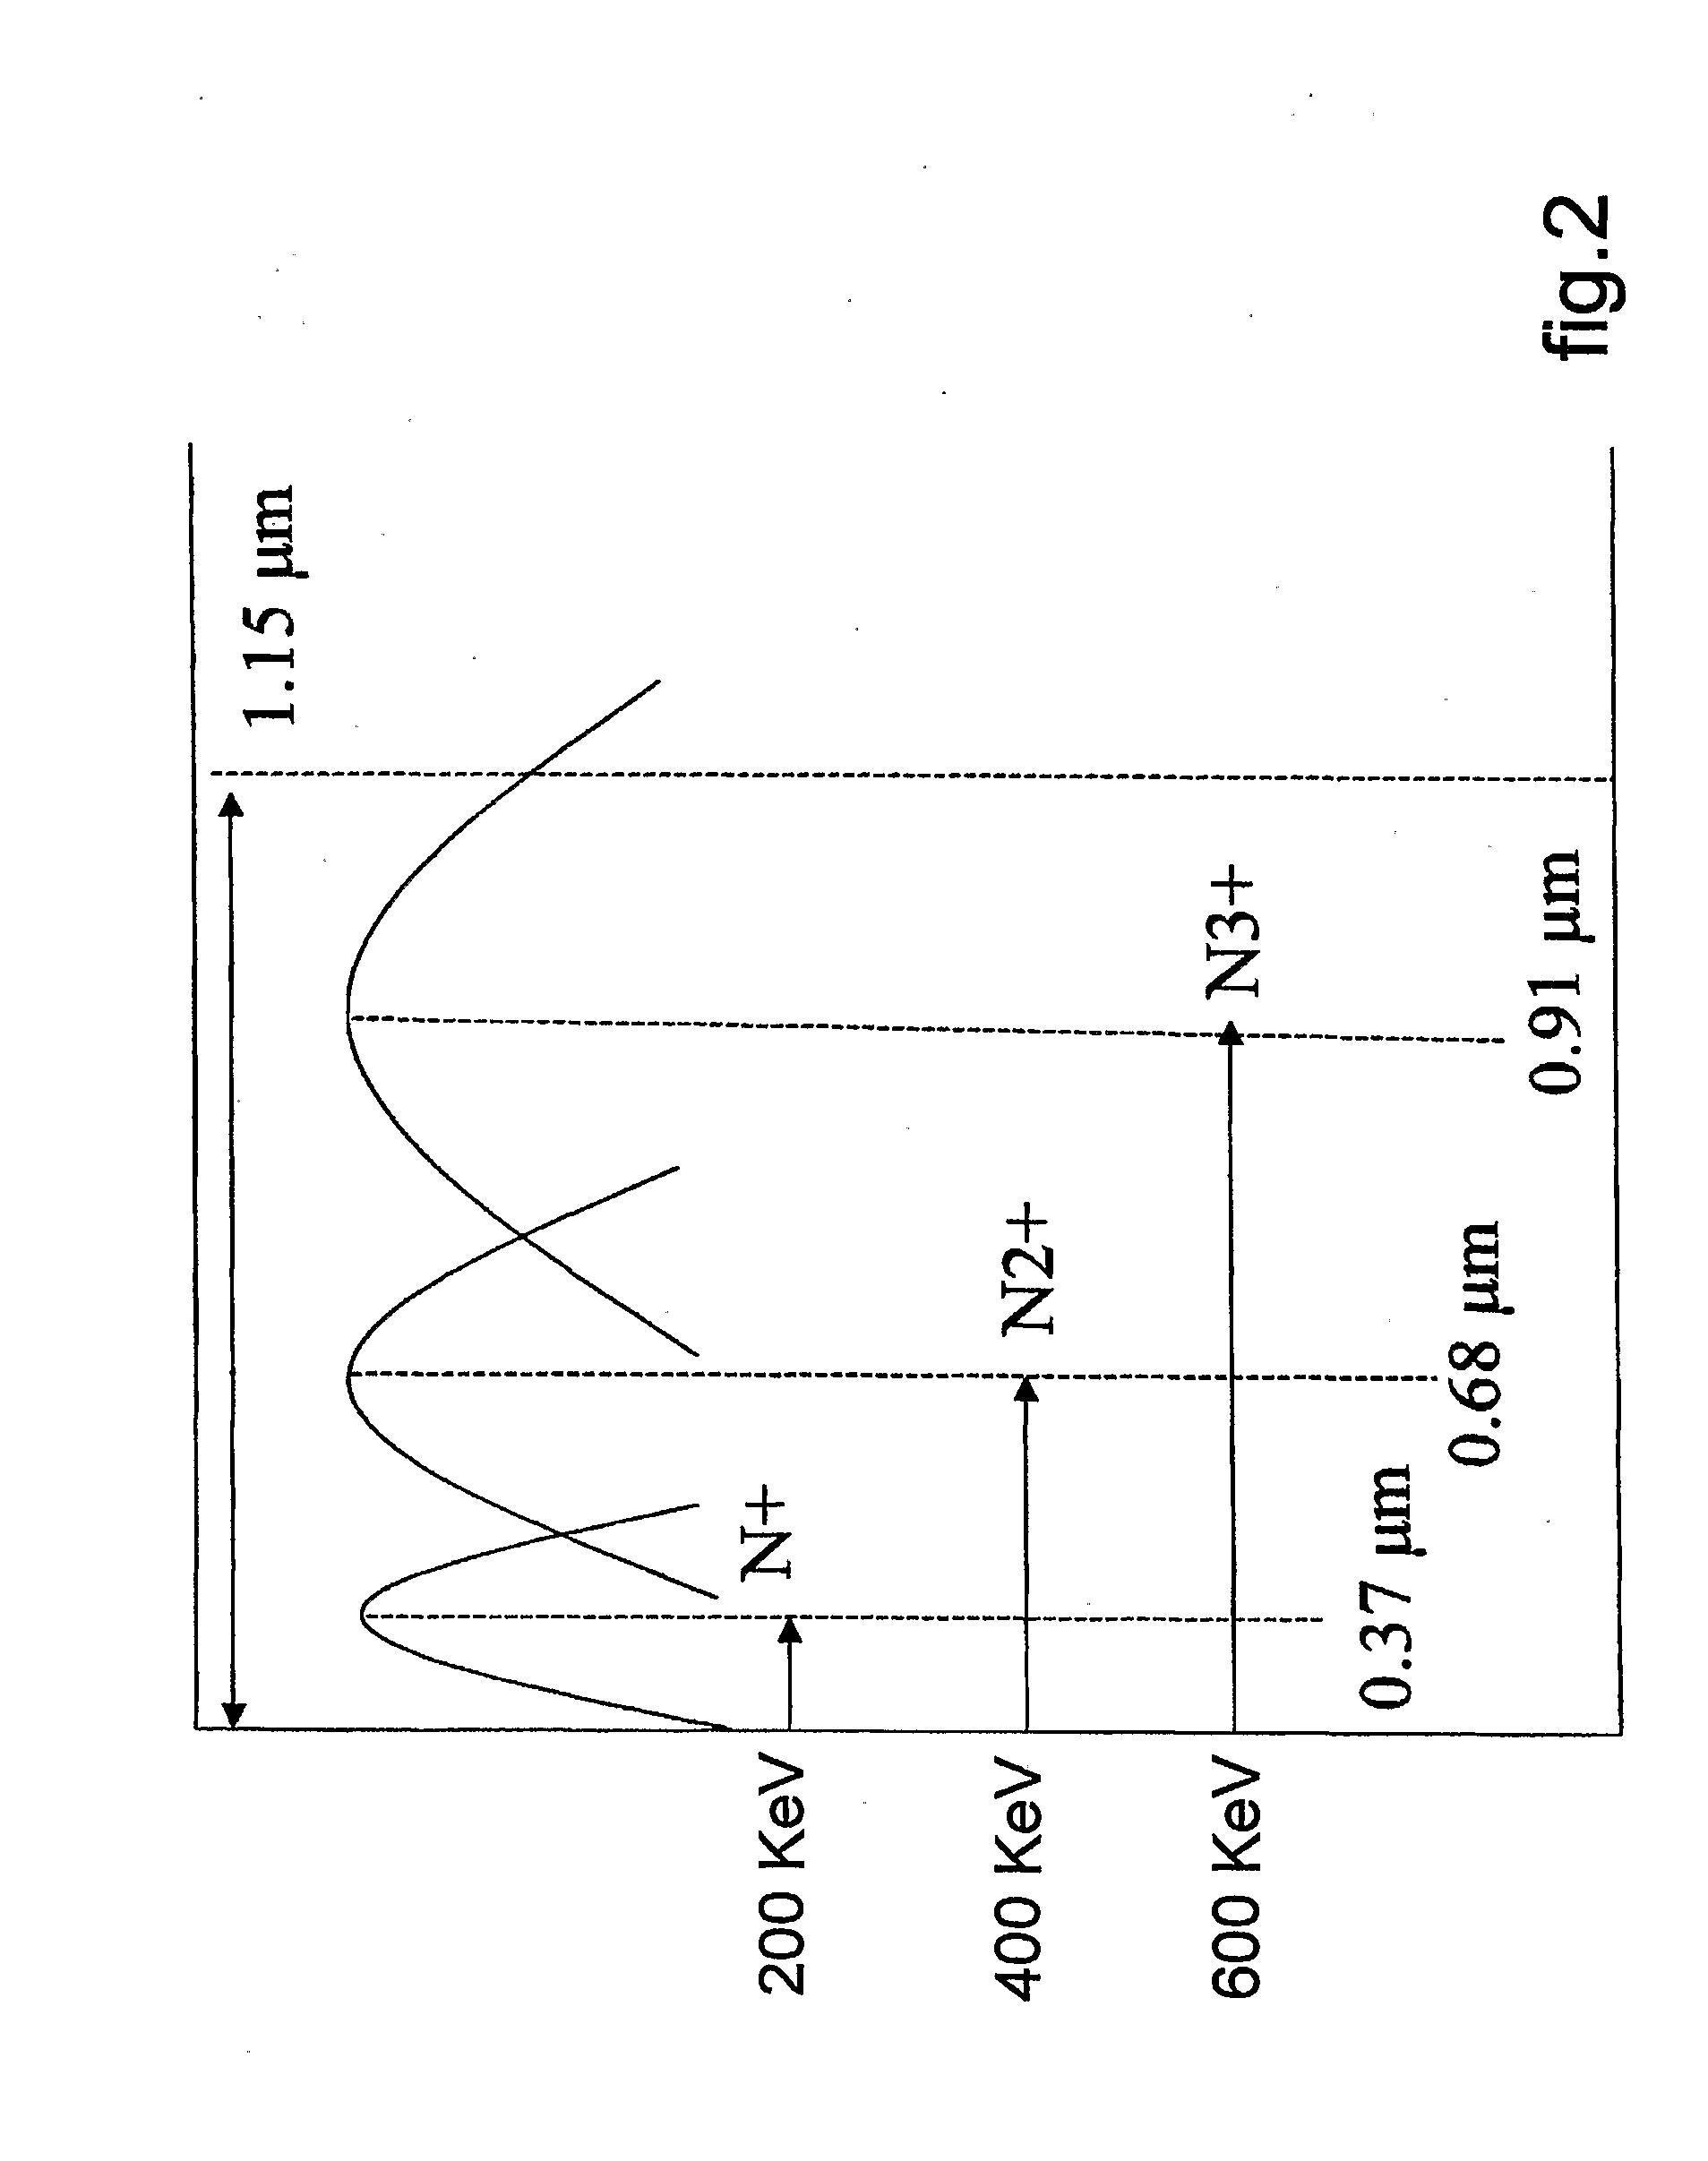 Apparatus for ion nitriding an aluminum alloy part and process employing such apparatus